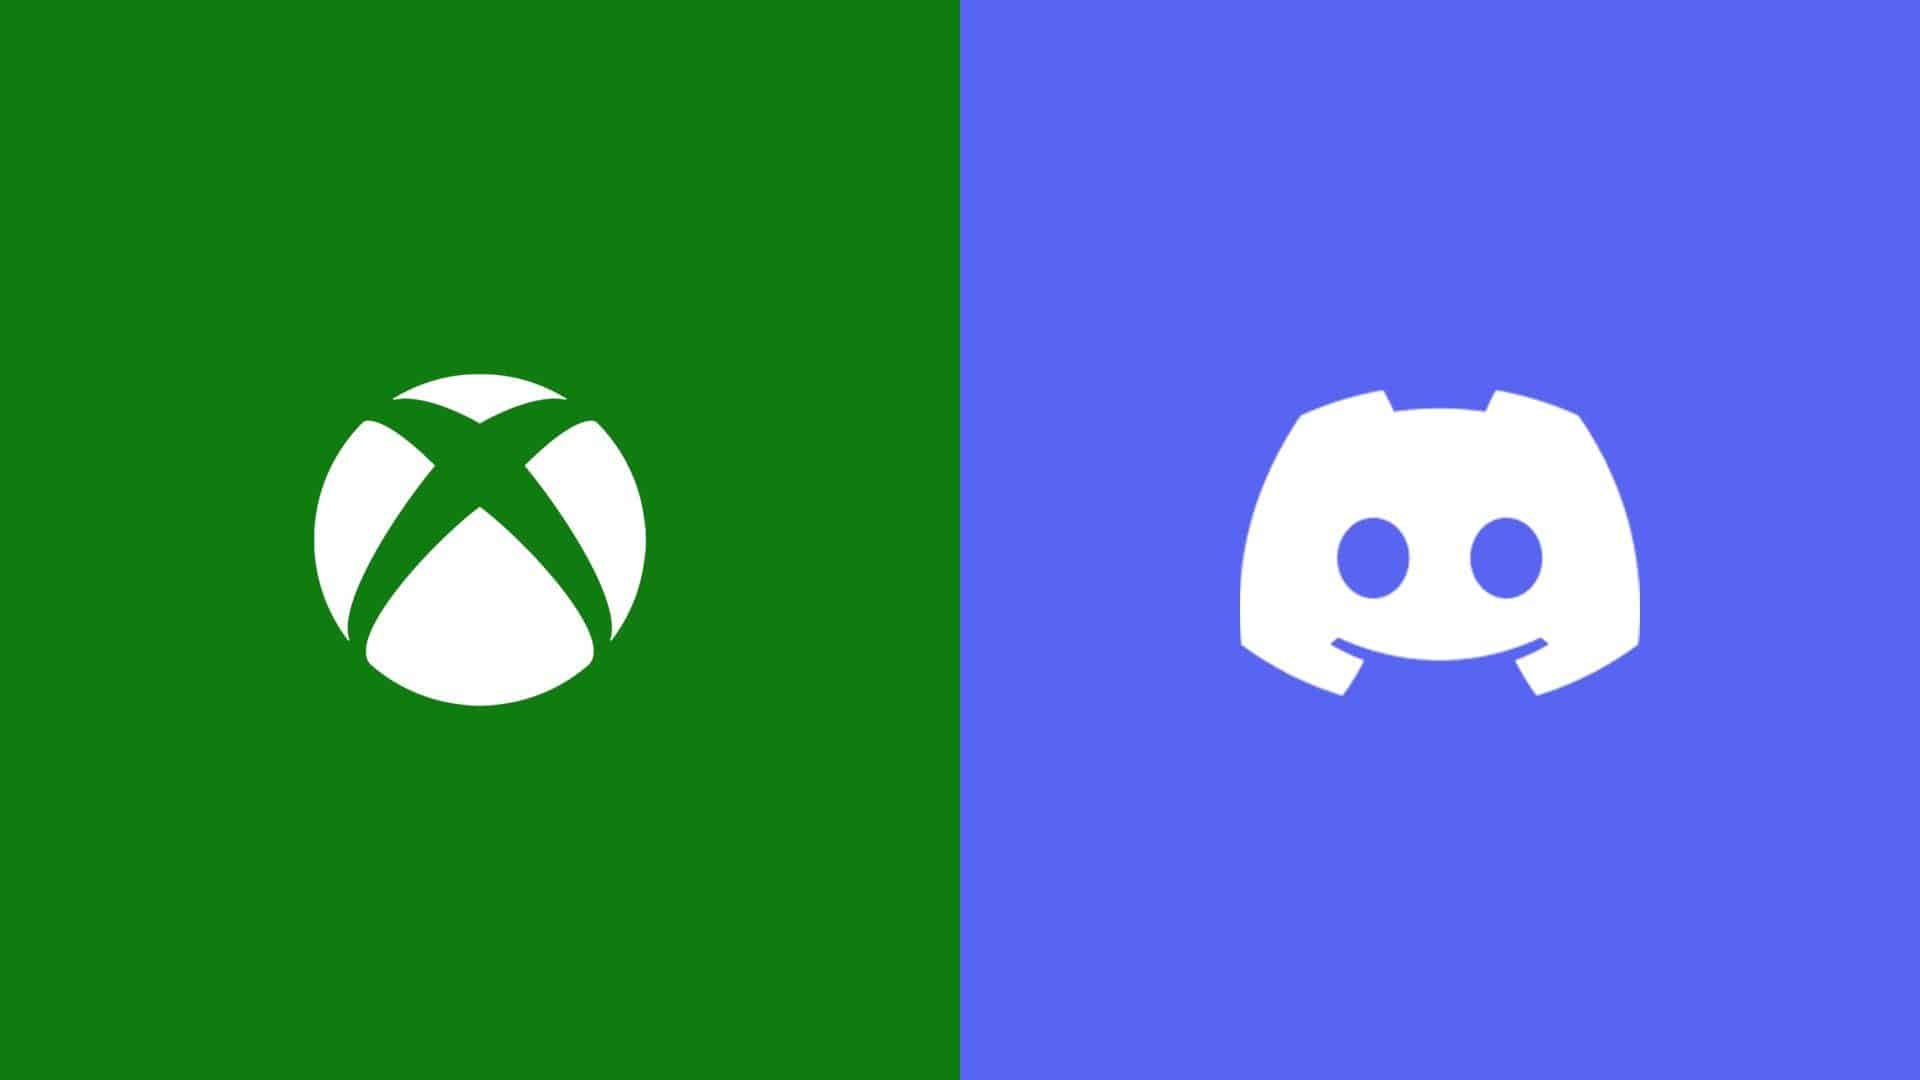 Discord Voice is now available for Xbox consoles